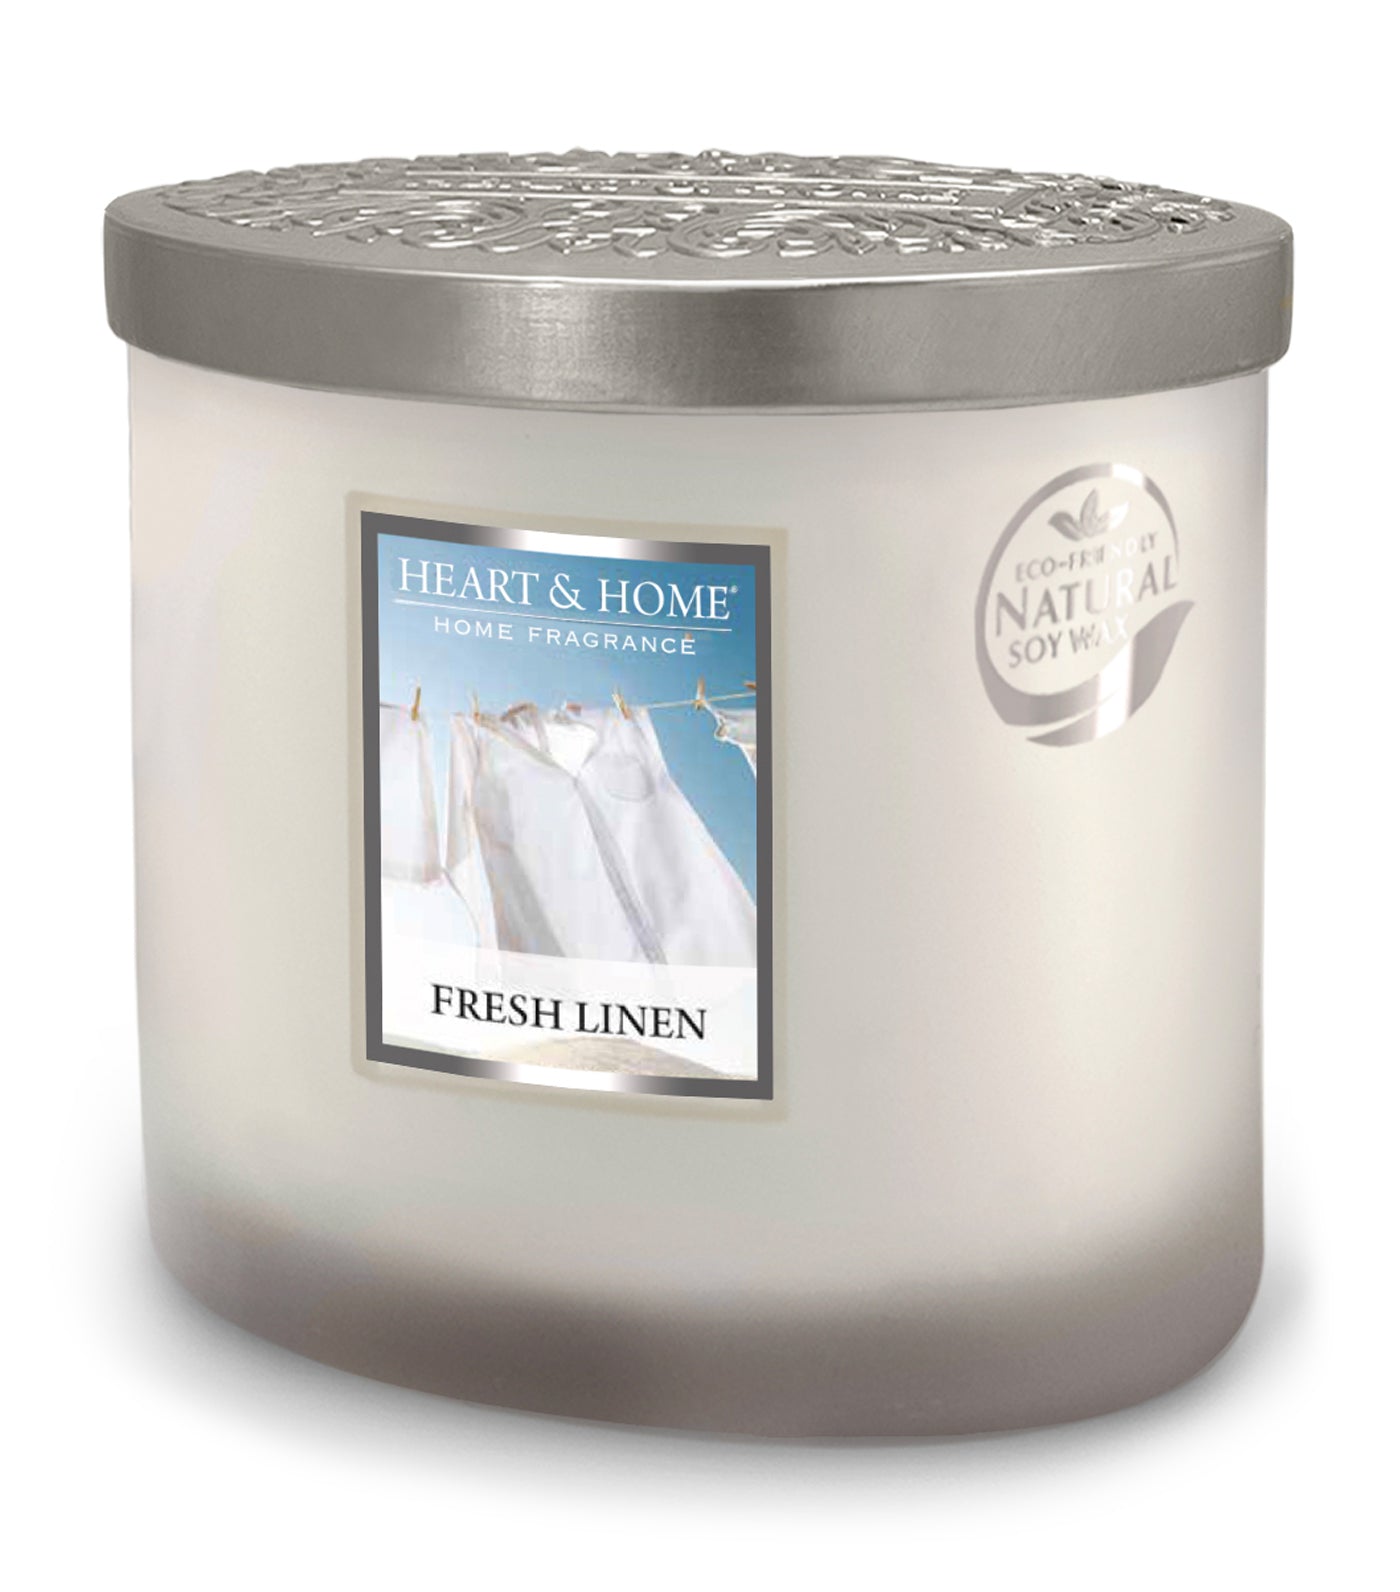 heart & home fresh linen - twin wick soy candle